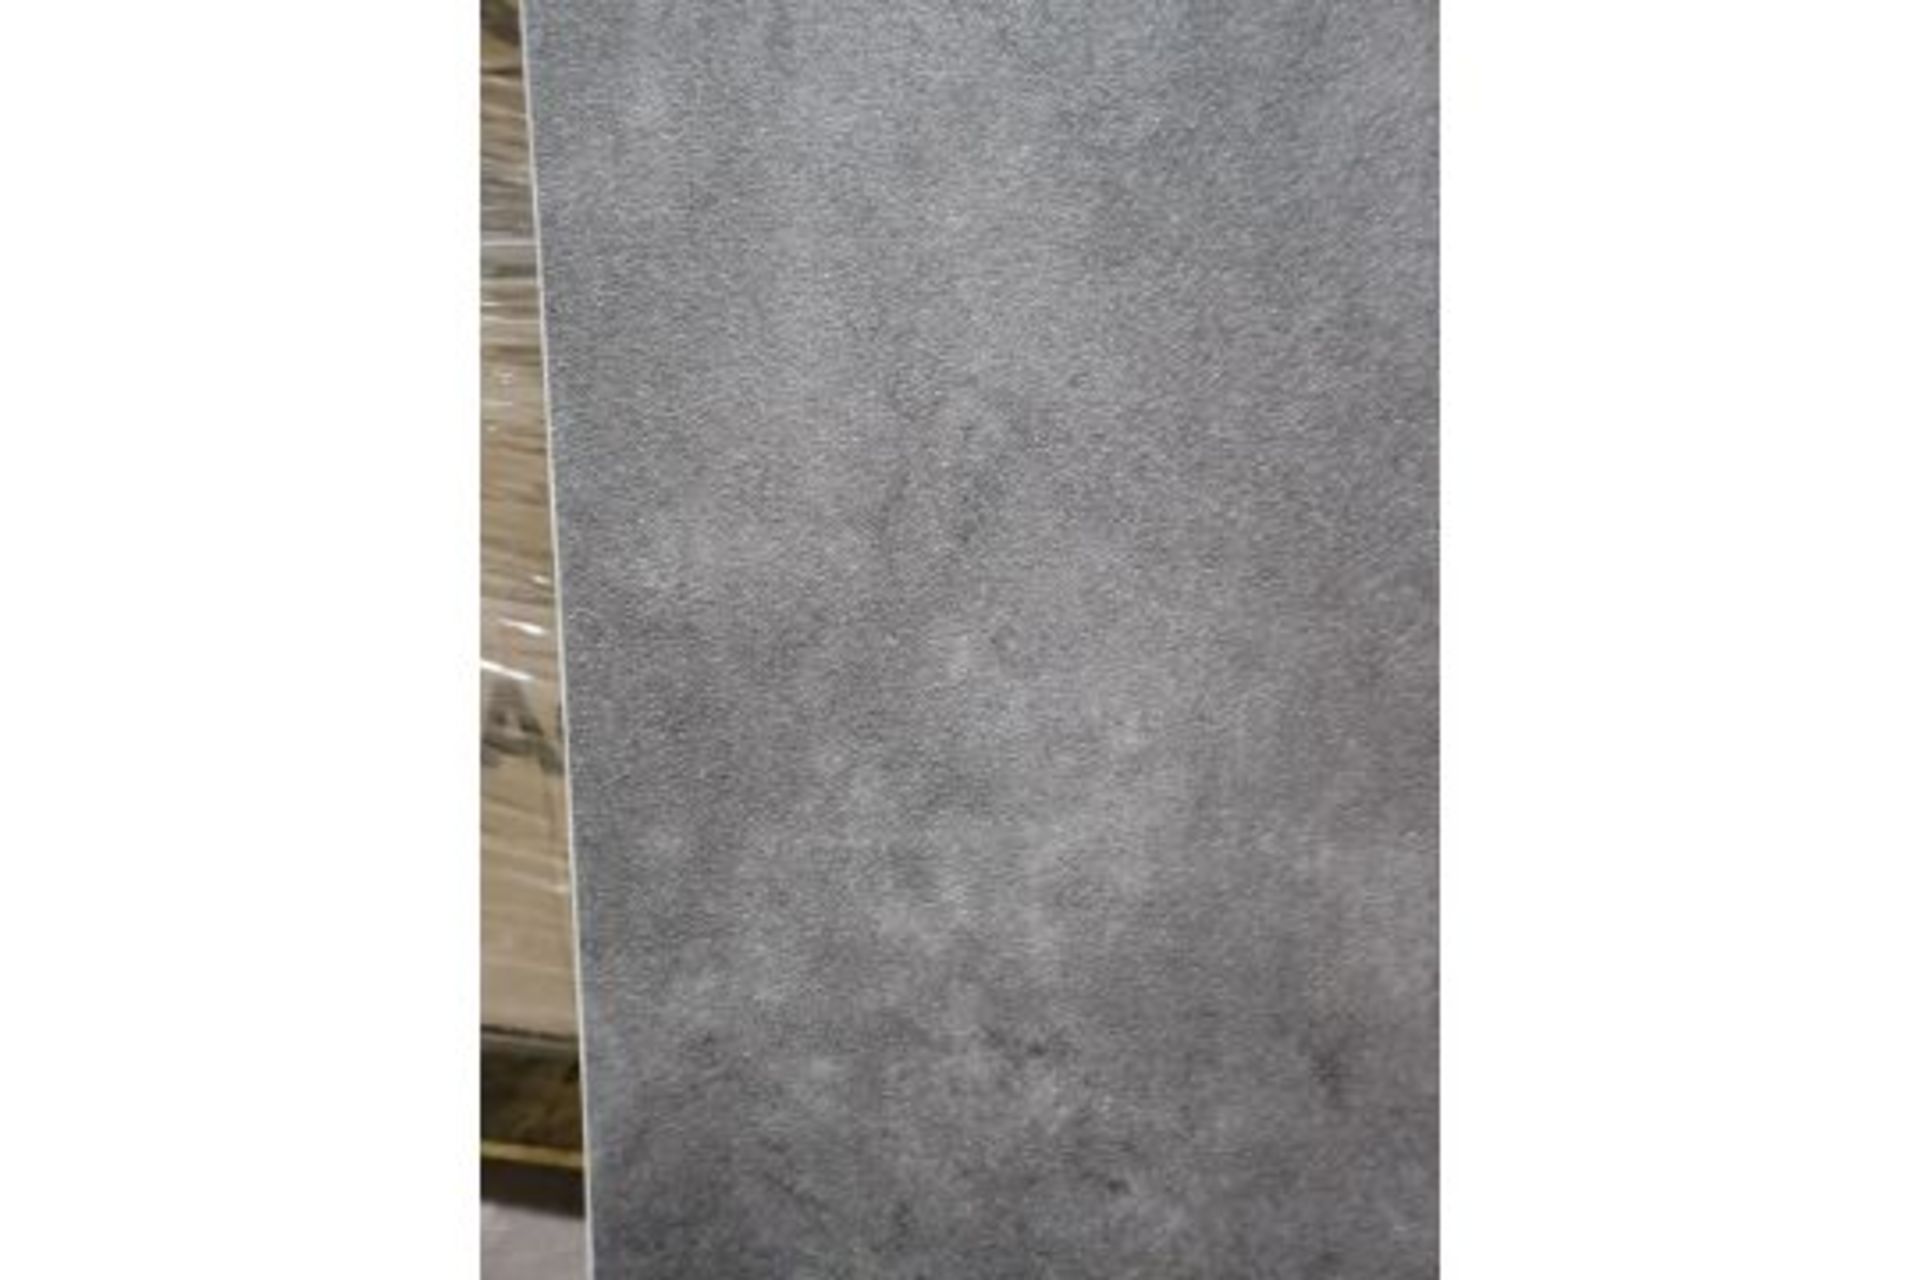 10 x PACKS OF BACHETA LUXURY VINYL CLICK TILE. STYLE: GREY. RRP £62 PER PACK. EASY TO CUT. 3.2MM - Image 2 of 2